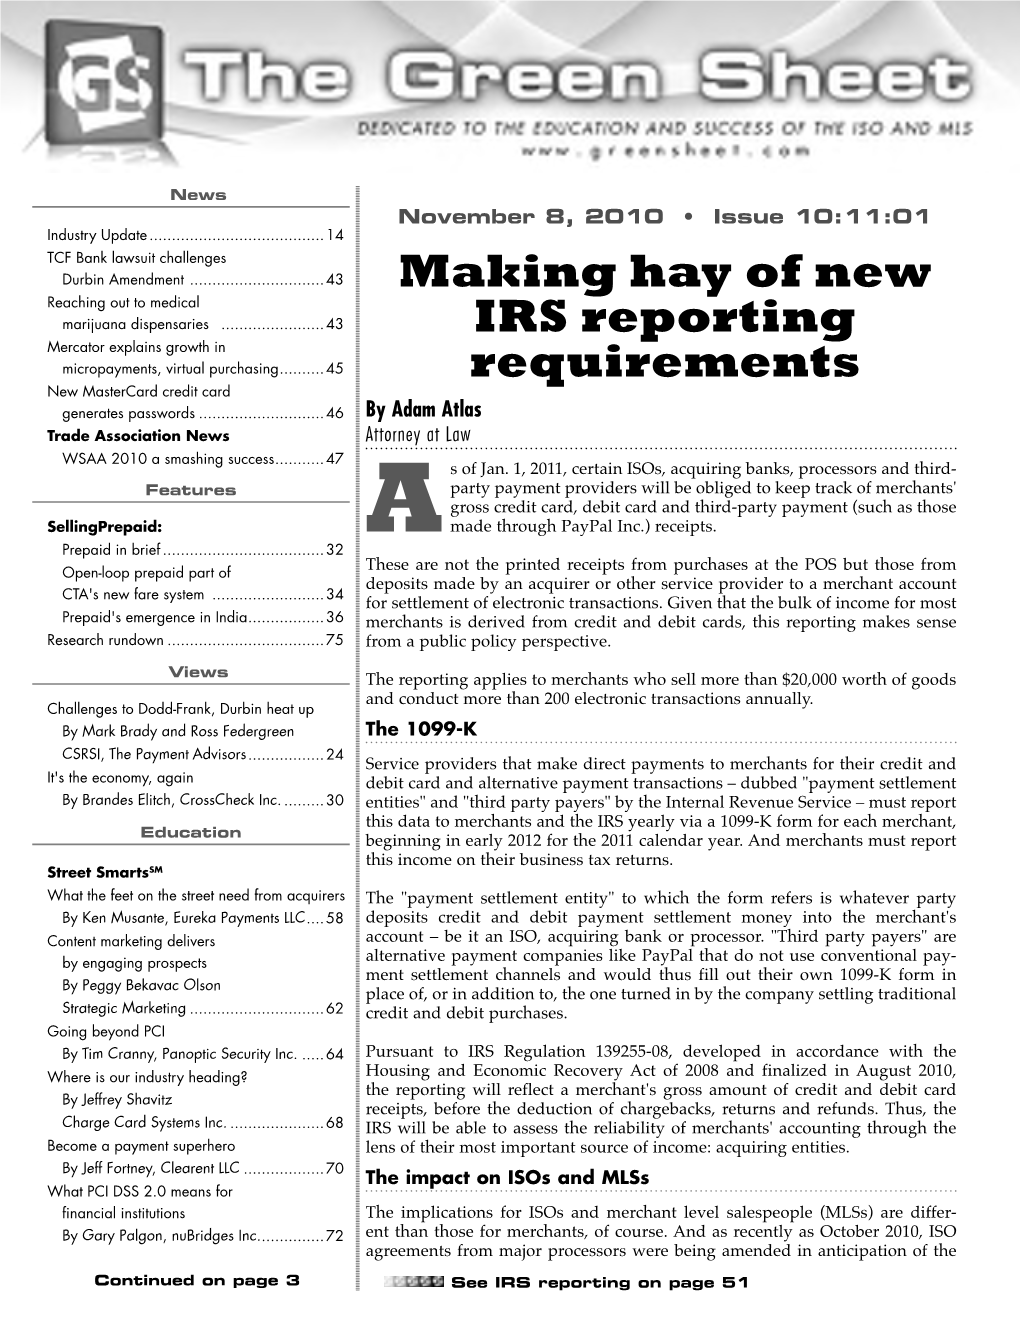 Making Hay of New IRS Reporting Requirements